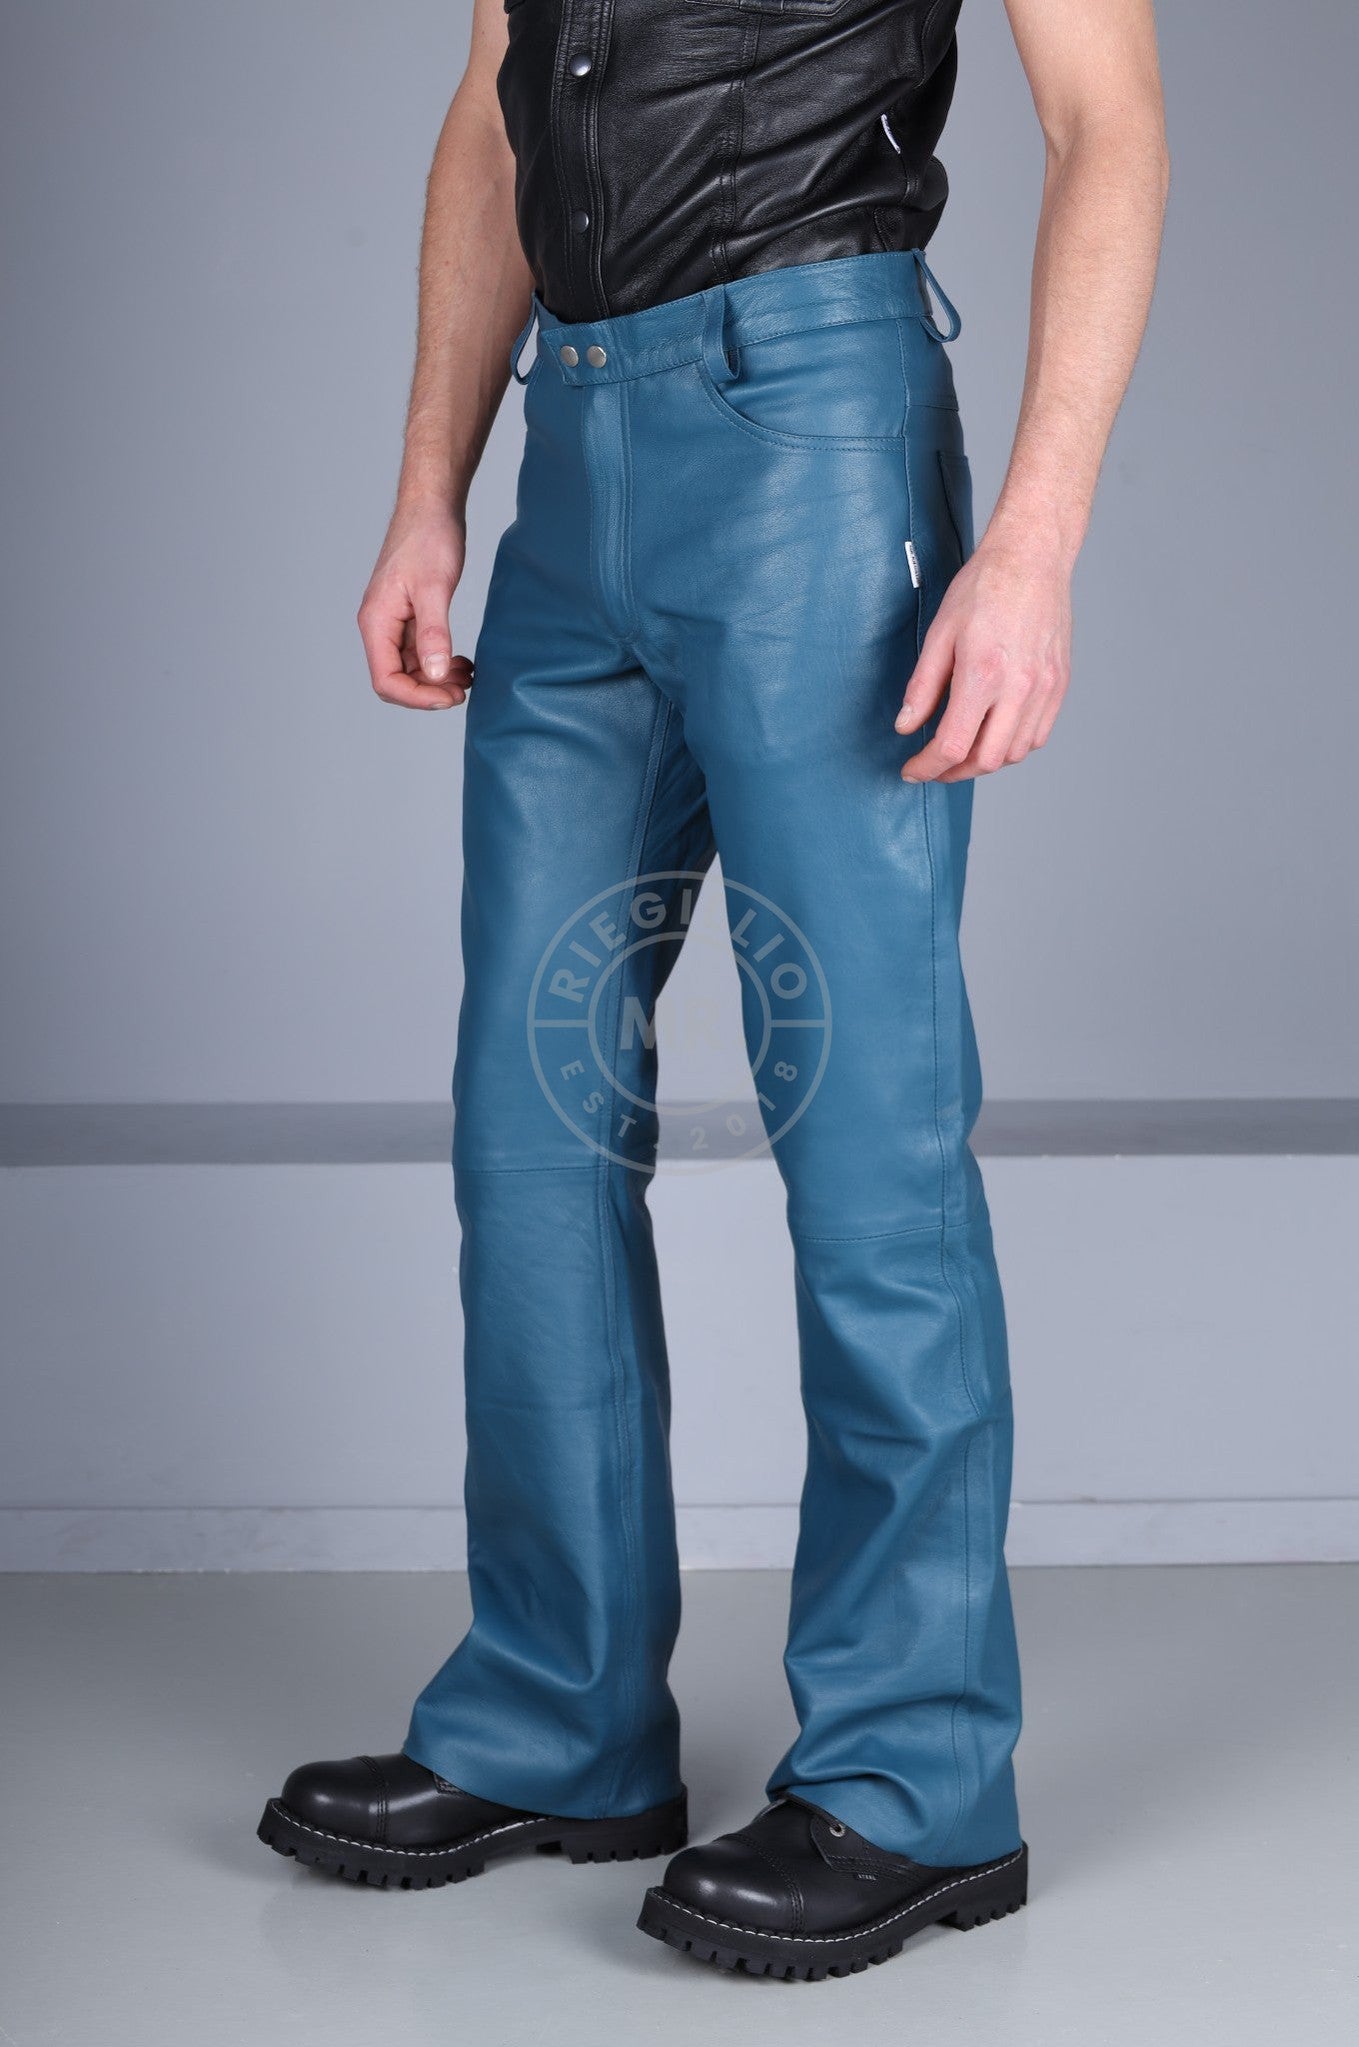 Jeans Blue Leather Bootcut Pants